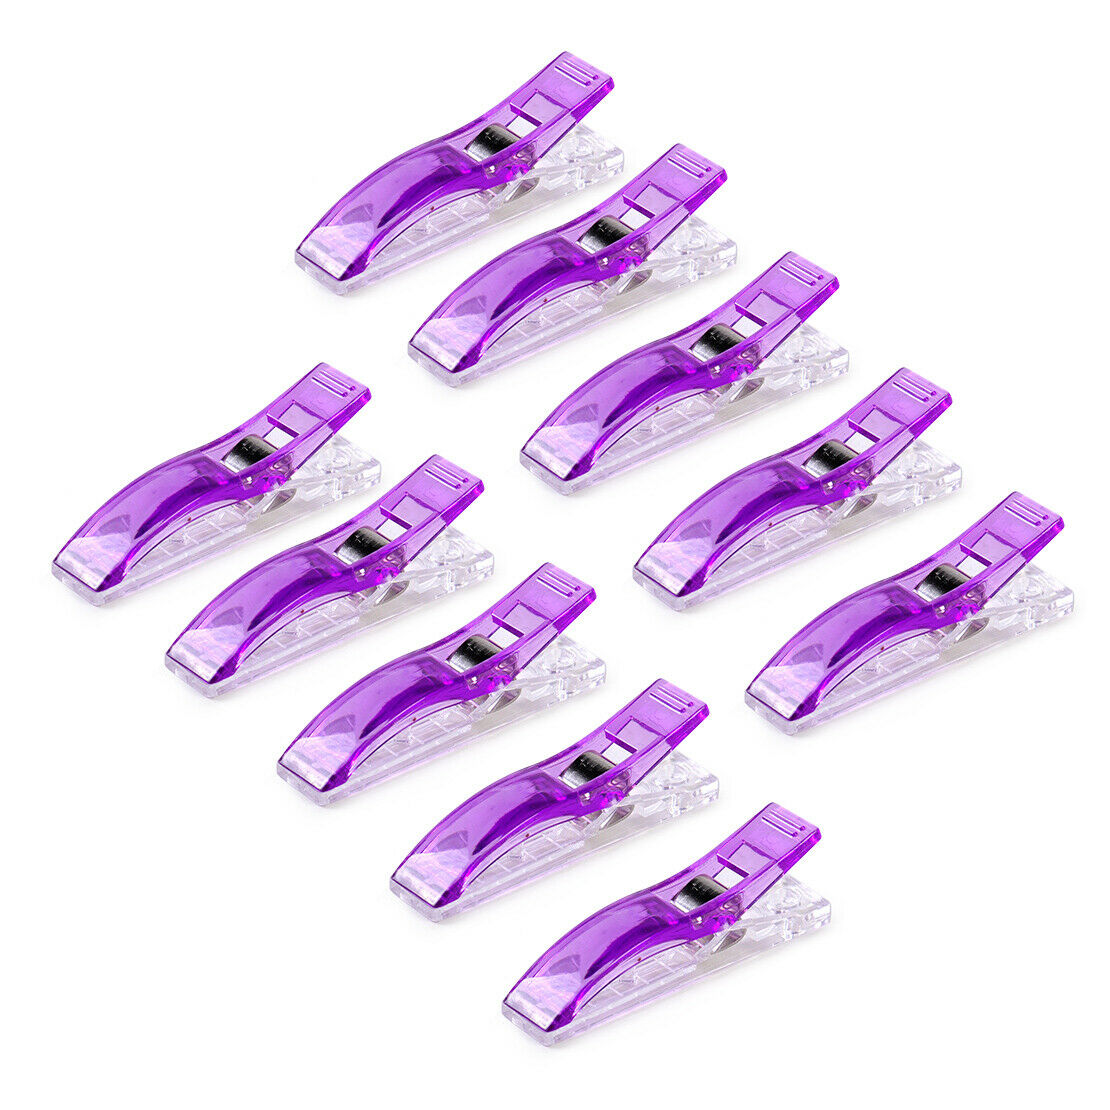 10x Jumbo Wonder Clips Binding Fit for Fabric Craft Sewing Quilting Knitting An